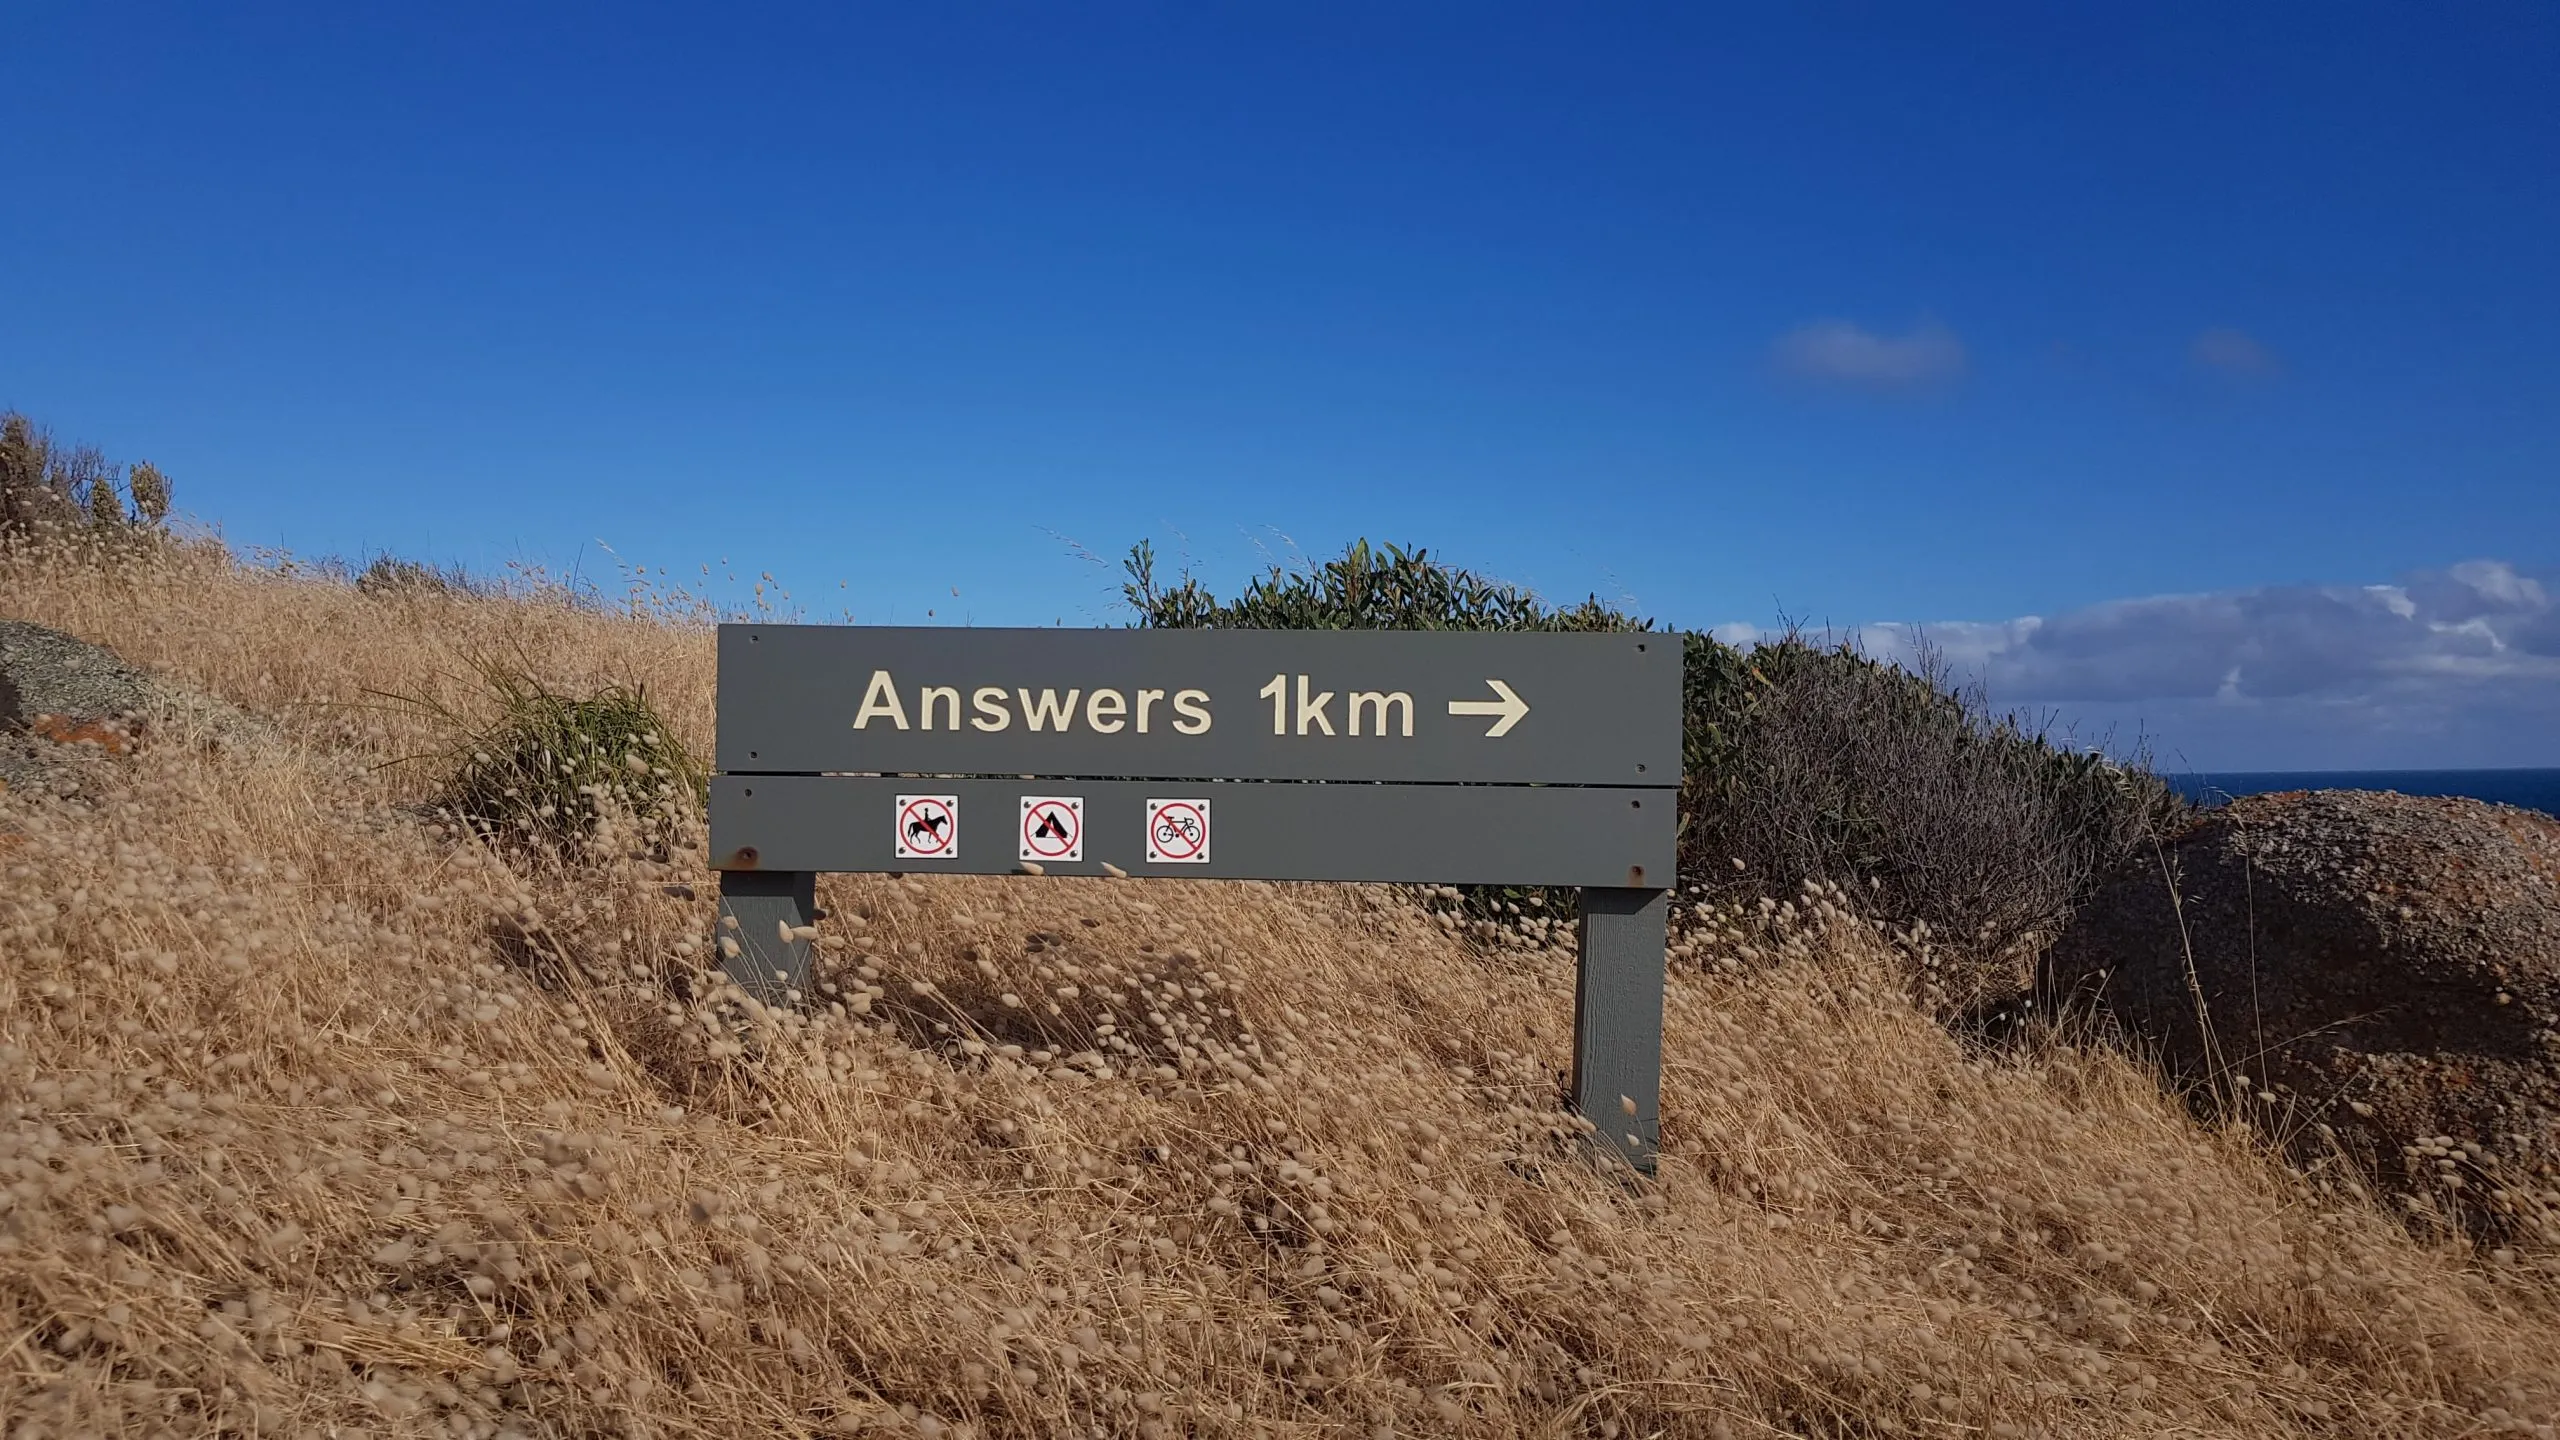 A wooden road sign that direct you to Answers 1 km that way